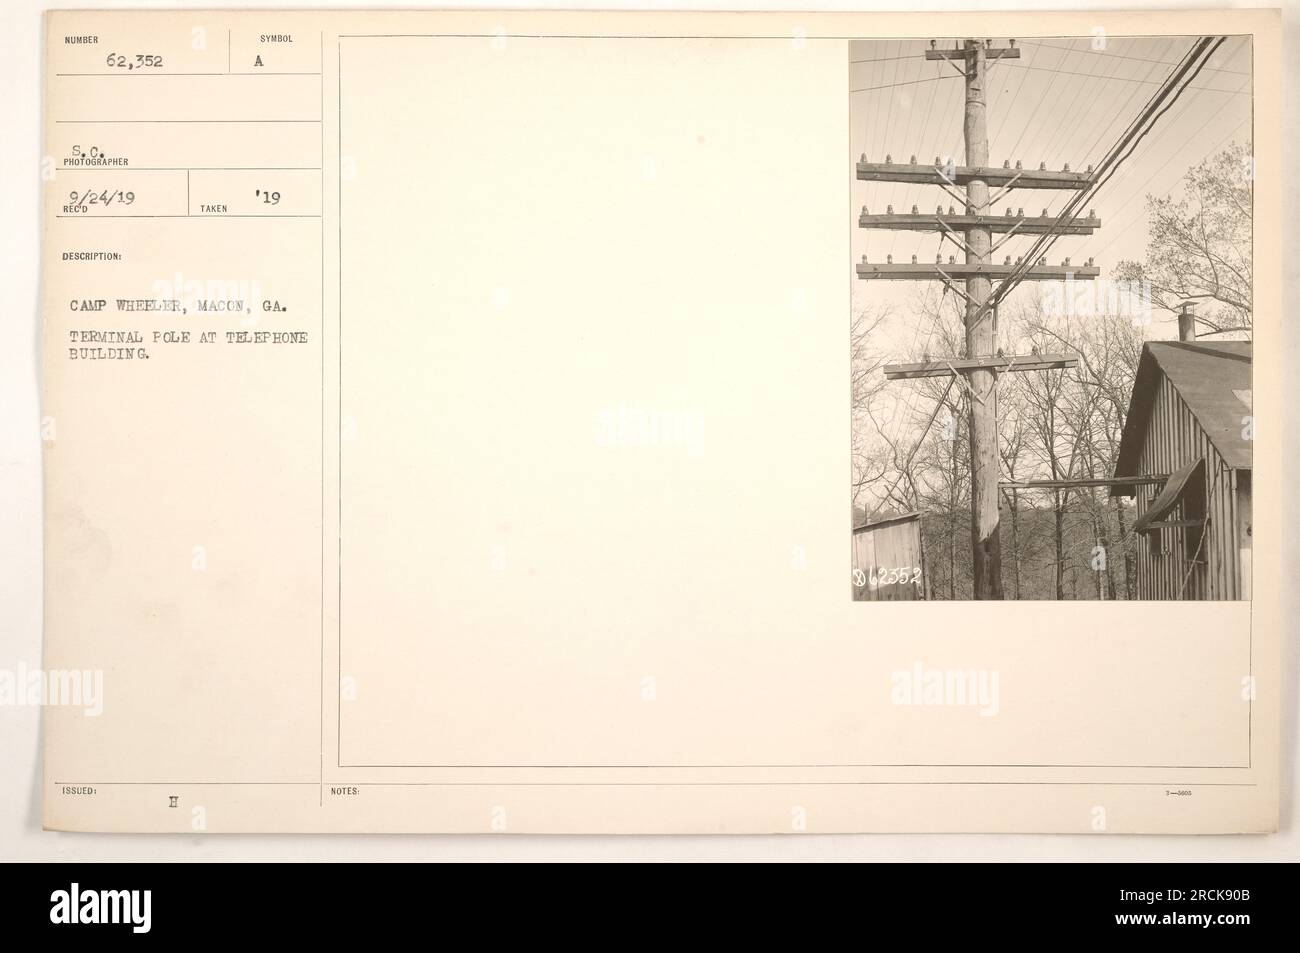 Terminal pole at telephone building in Camp Wheeler, Macon, GA. The photograph was taken by photographer St. C on 9/24/19. The building is identified with the number 62,352. The image is part of a collection documenting American military activities during World War One. Notes indicate reference number 342552. Stock Photo